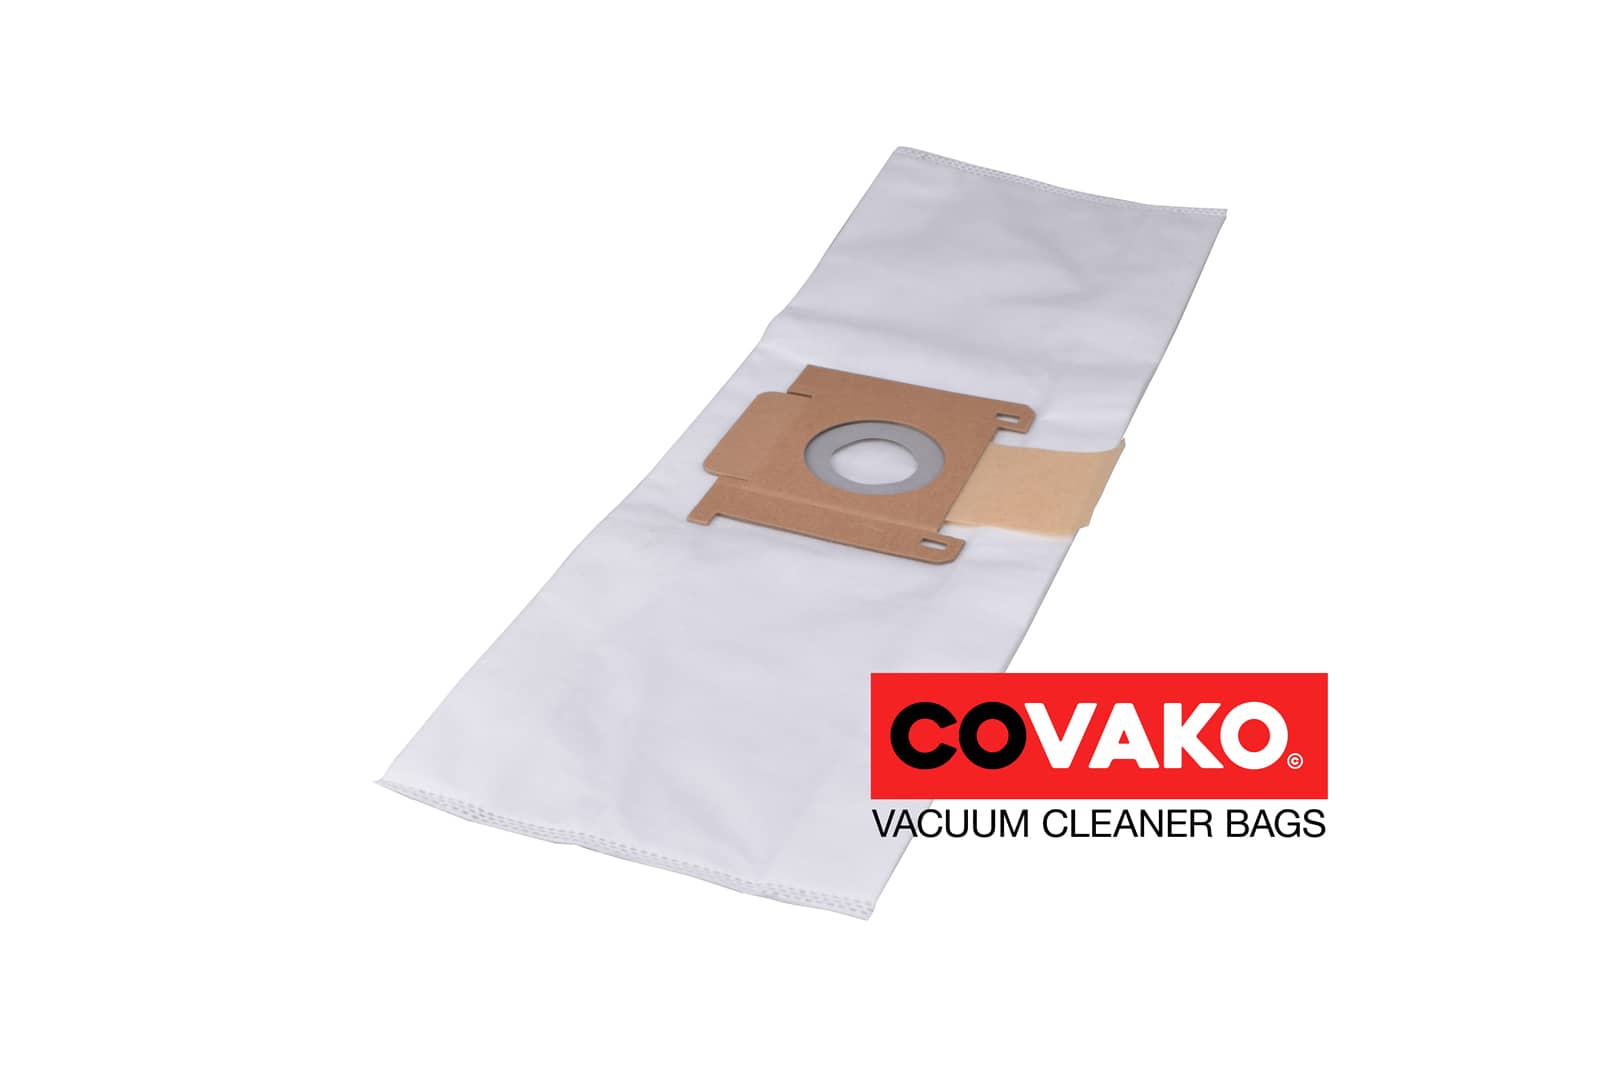 Ivac i-vac C6 / Synthesis - Ivac vacuum cleaner bags